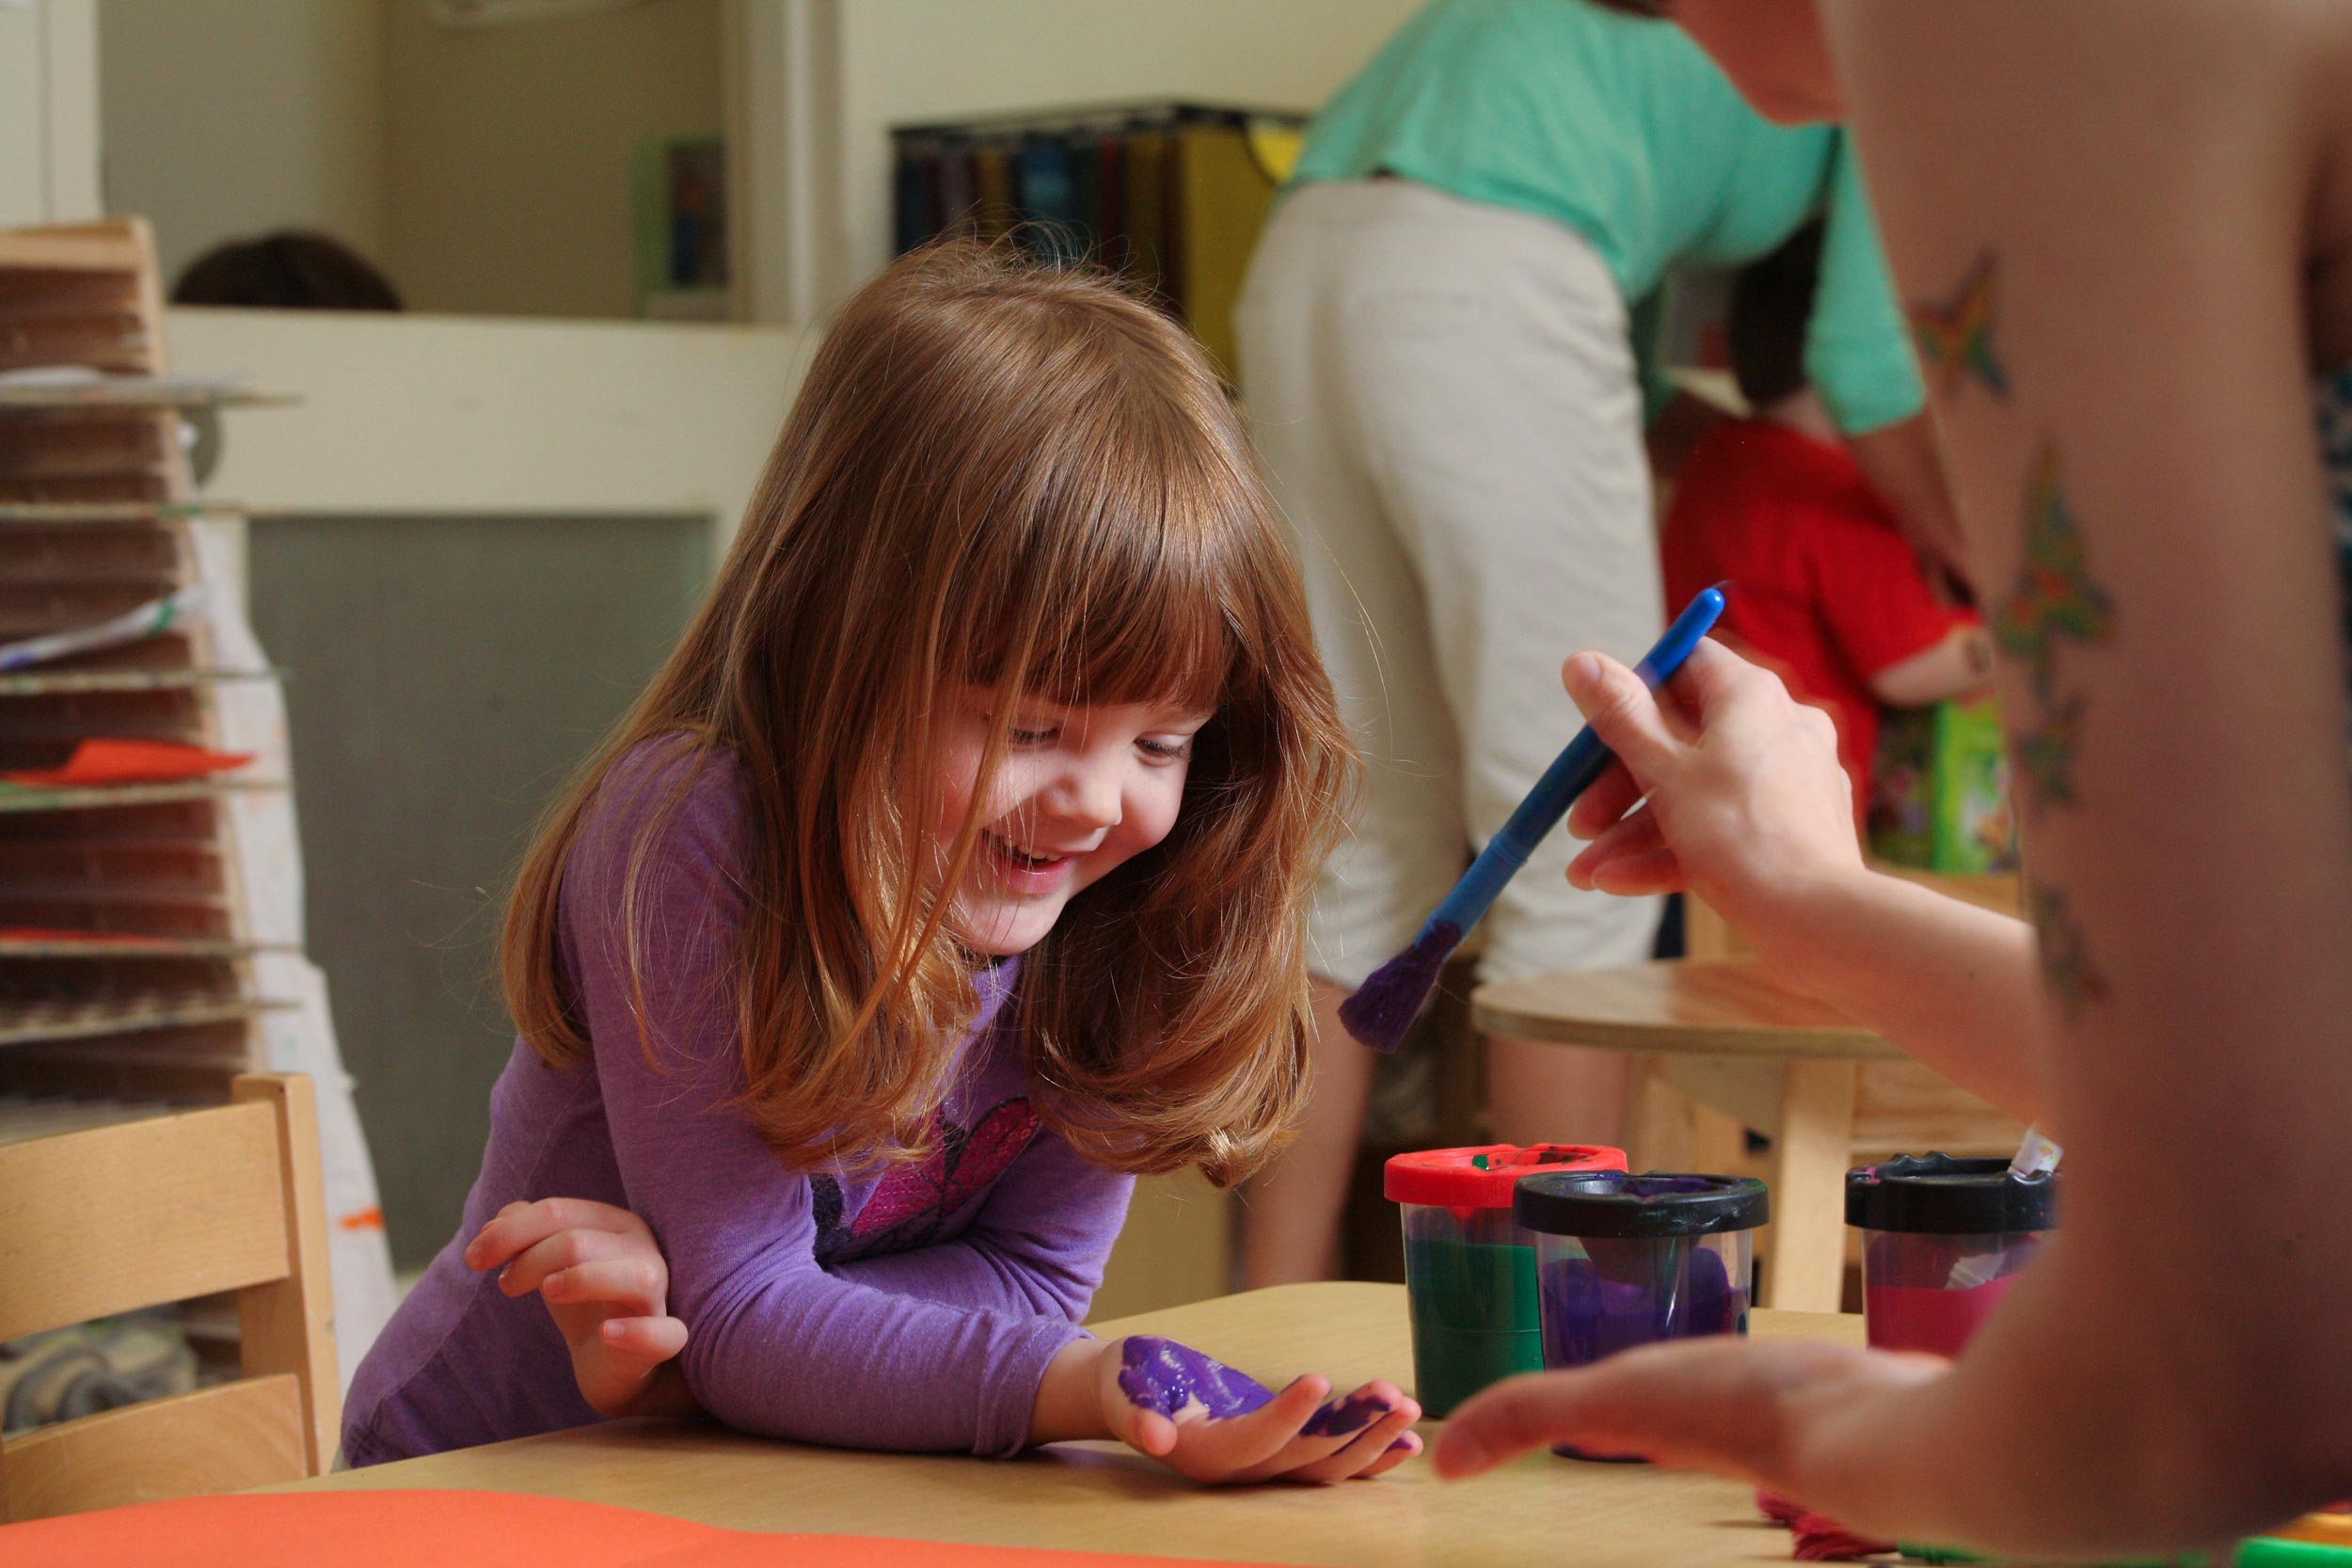 Child letting an adult paint their hand in purple